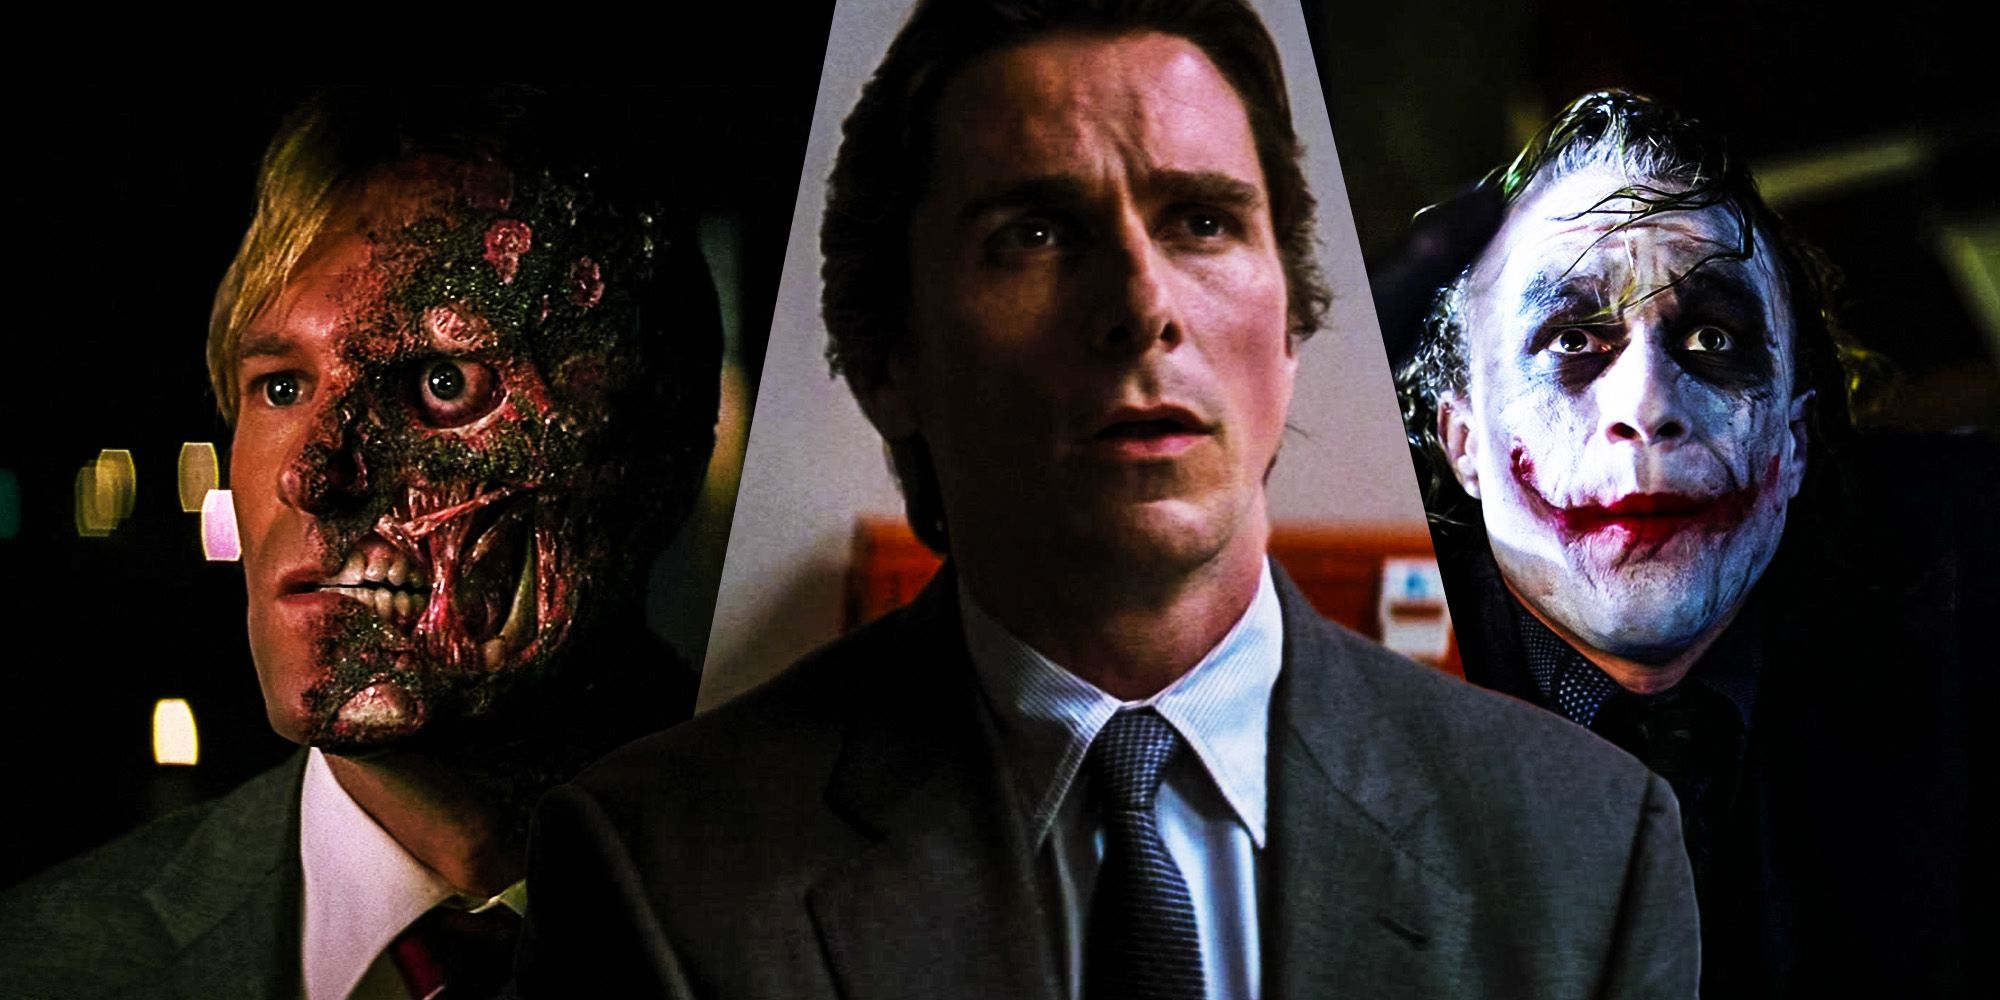 What If Two-Face & The Joker Returned For The Dark Knight Rises